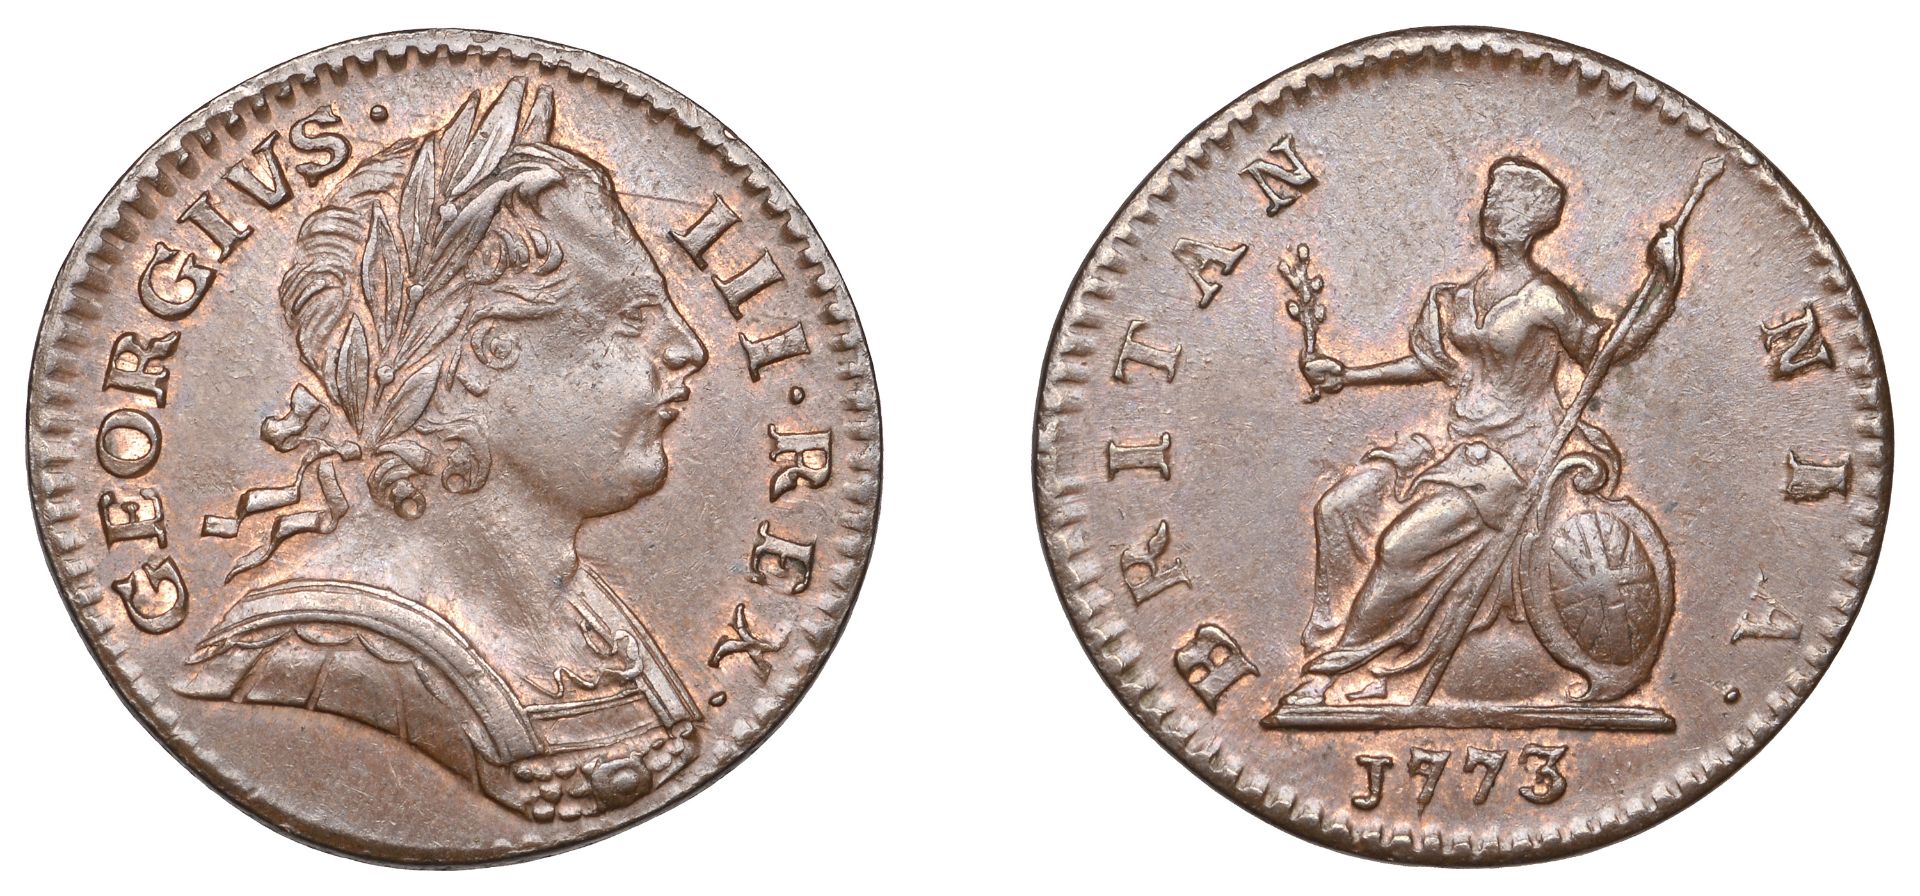 George III (1760-1820), Tower Mint, London, Farthing, 1773, obv. 1, laureate bust right, top...